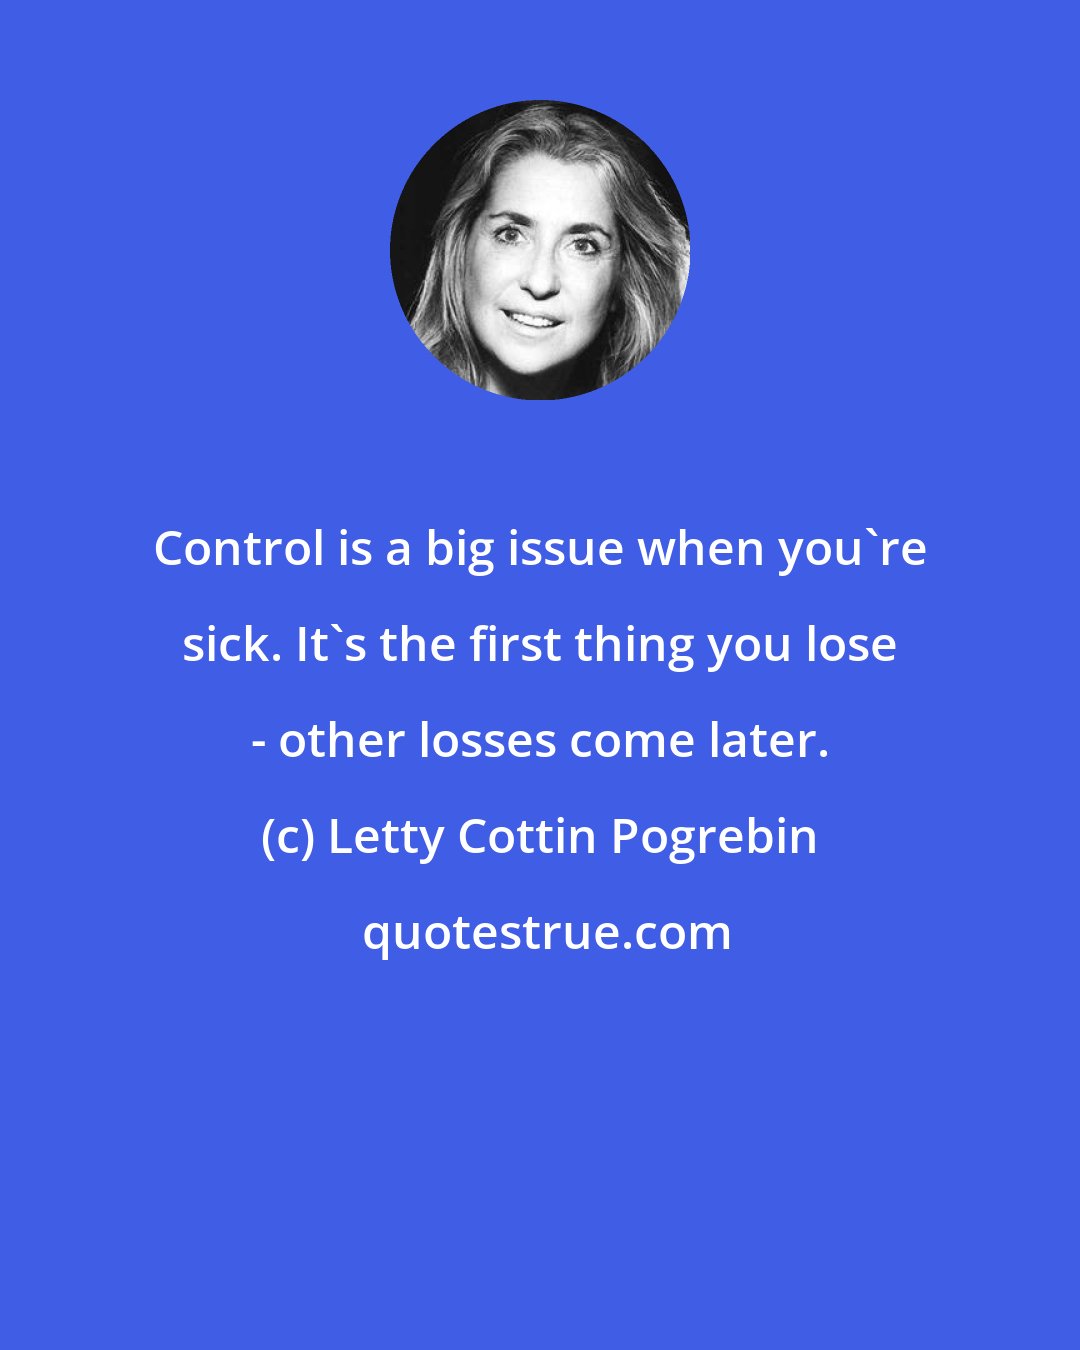 Letty Cottin Pogrebin: Control is a big issue when you're sick. It's the first thing you lose - other losses come later.